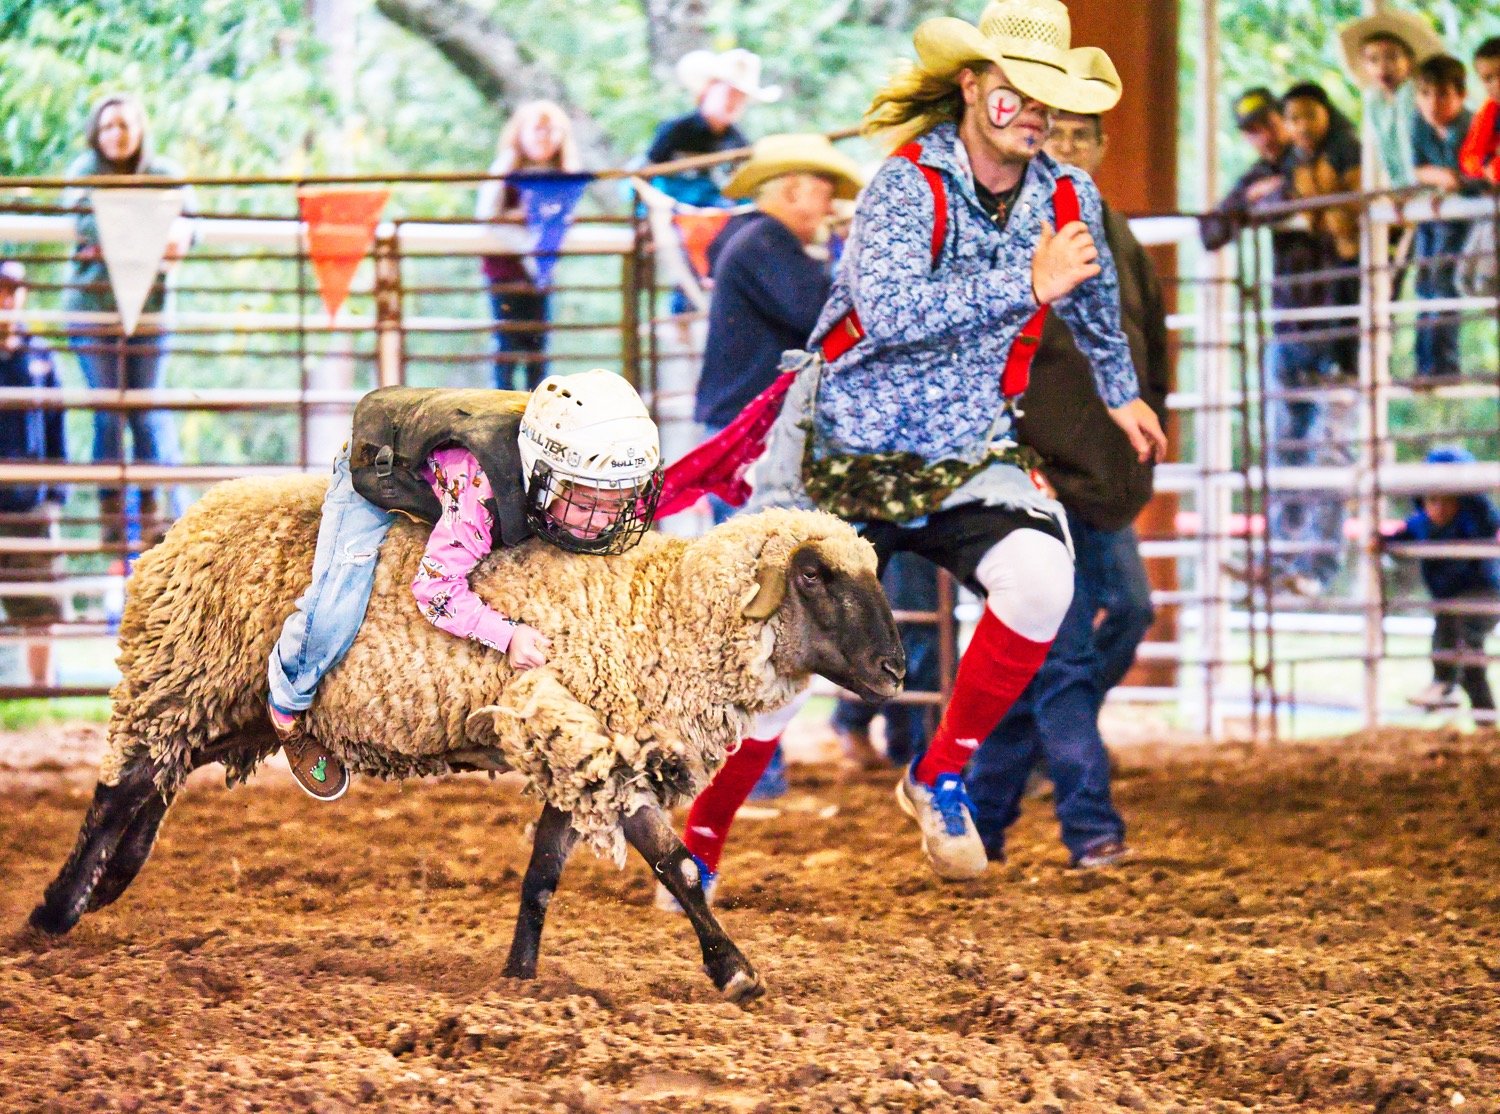 Sheepishness kept few children away from the opportunity to get a taste of the rodeo life, if only for a few seconds.